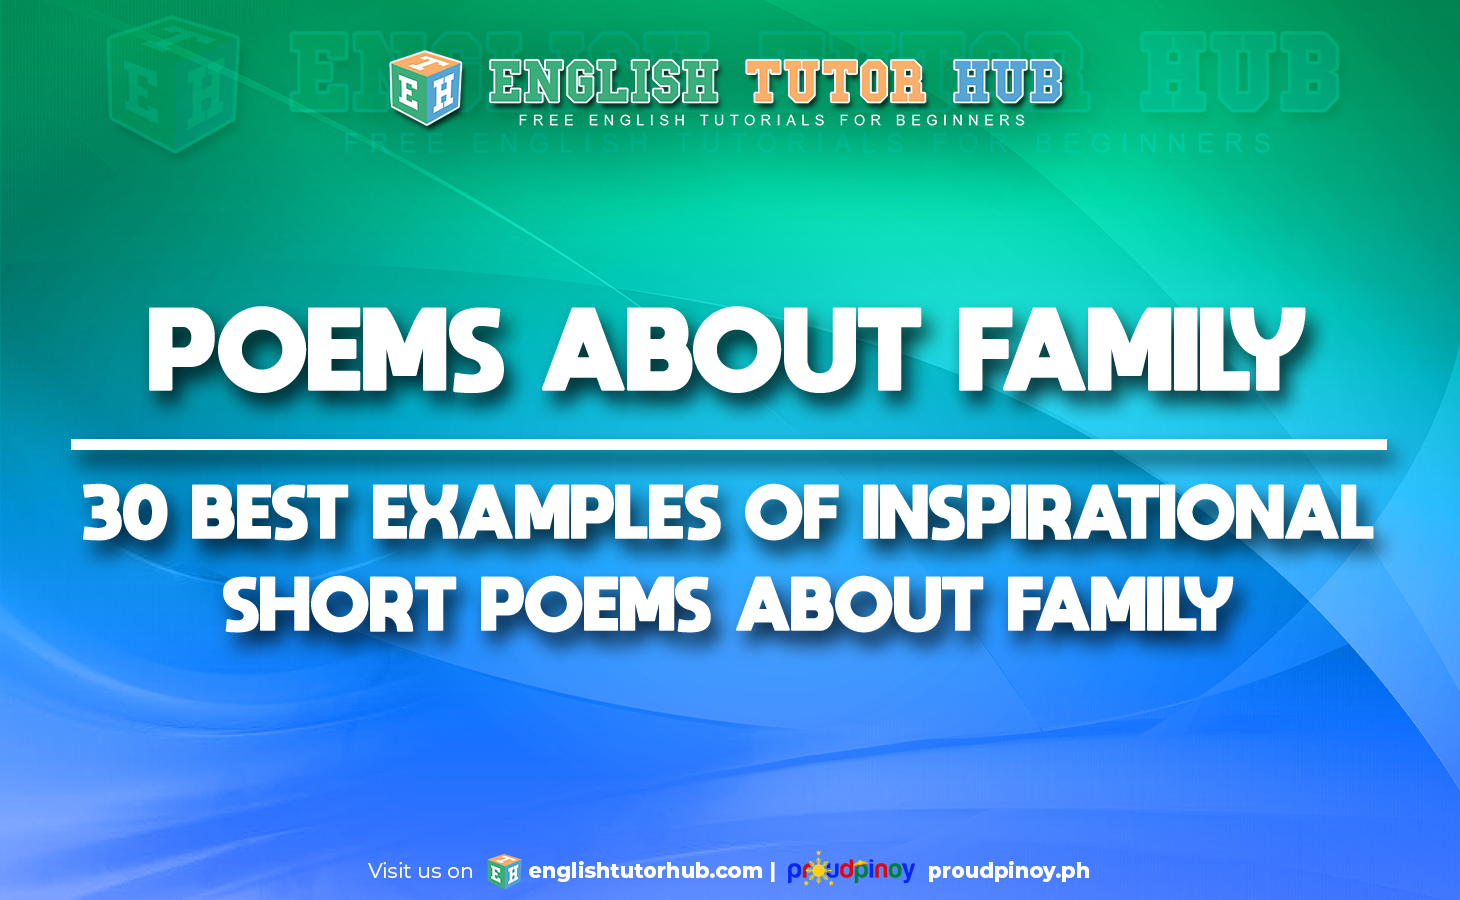 POEMS ABOUT FAMILY - 30 BEST EXAMPLES OF INSPIRATIONAL SHORT POEMS ABOUT FAMILY